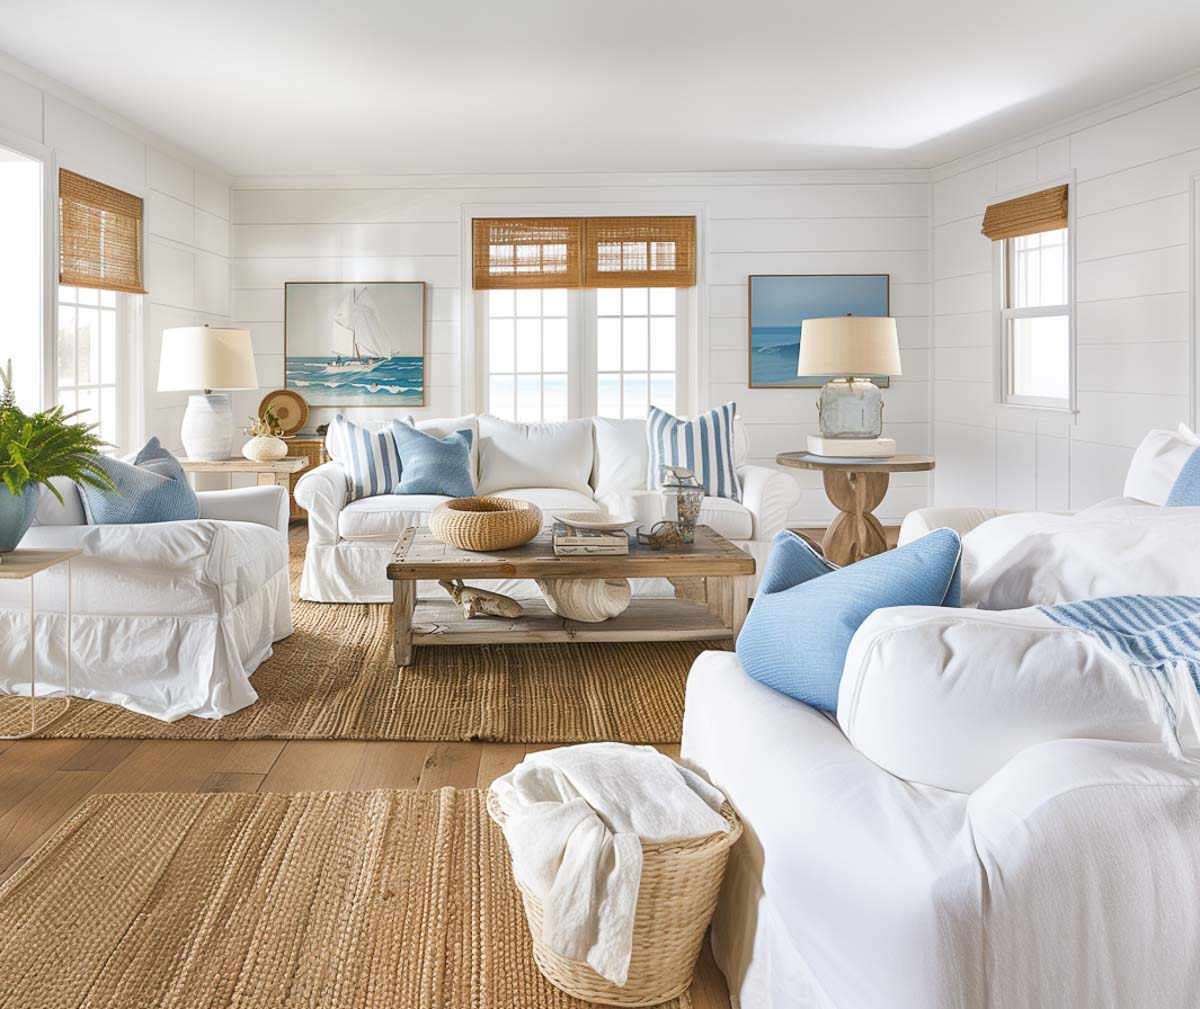 coastal style living room with white slipcovered sofas, two natural fiber rugs and accessories in soft blues